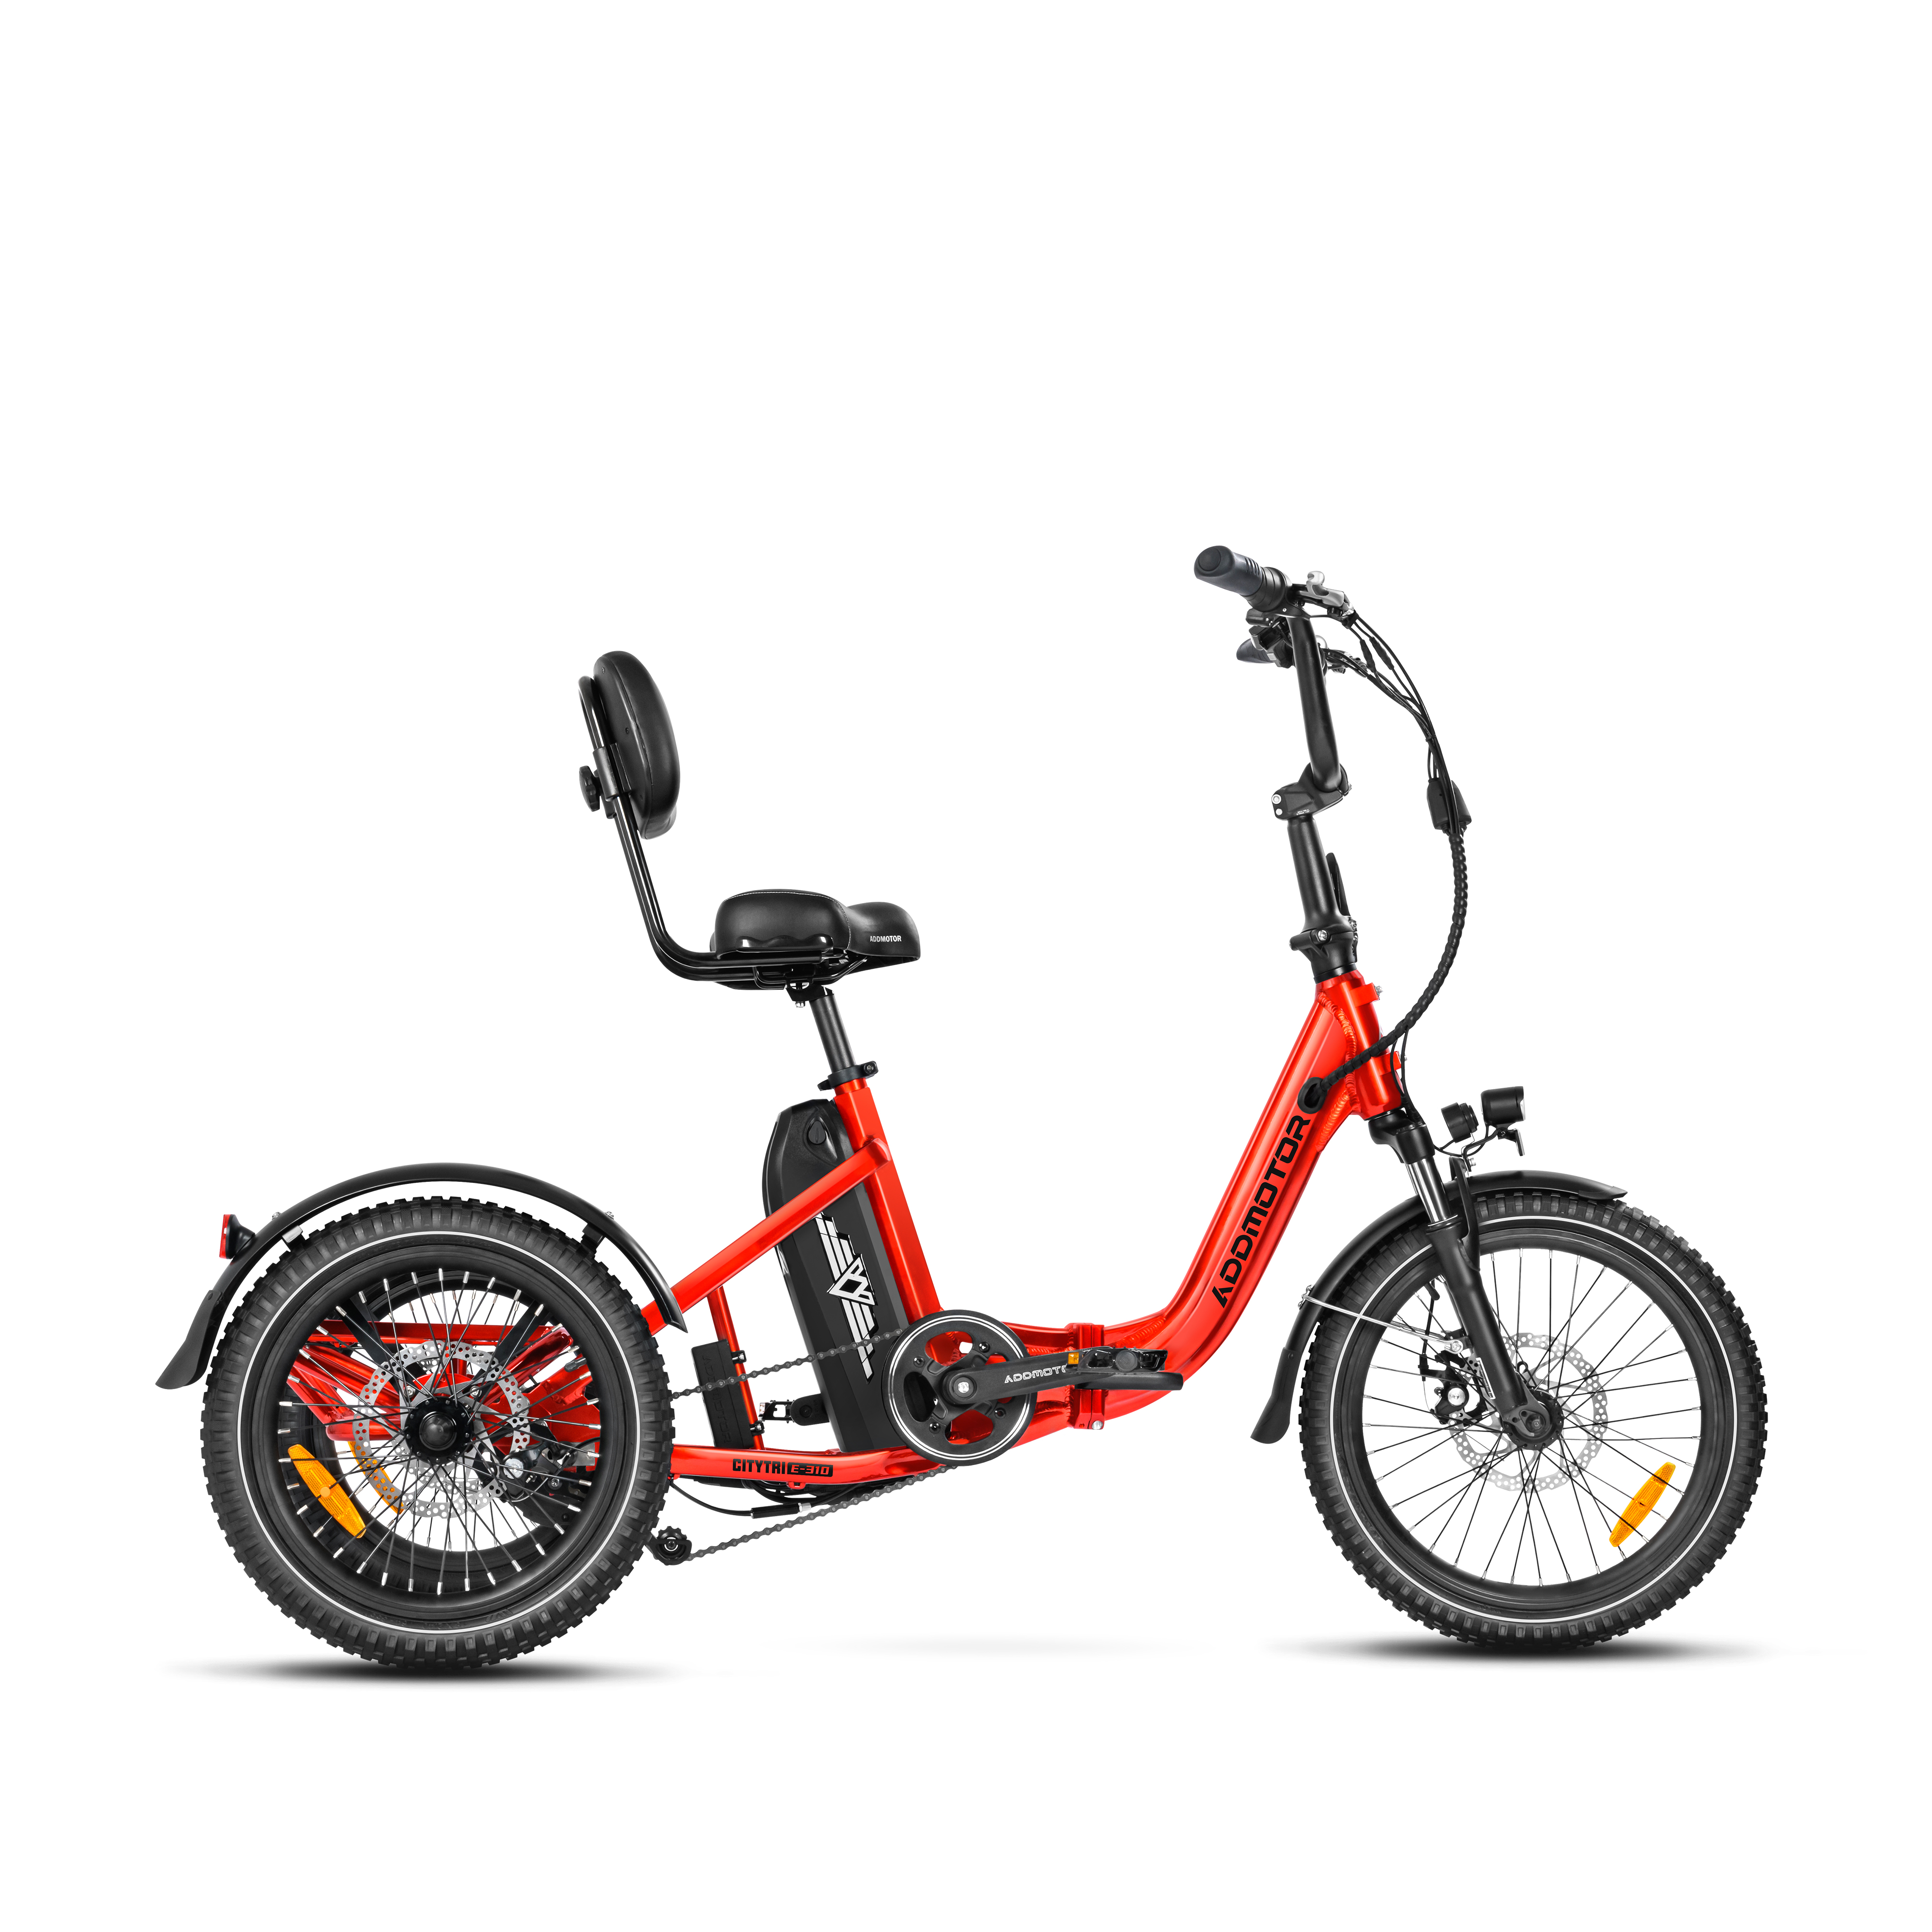 Addmotor Citytri E-310 750W Electric Trike for Adults Best Electric Tricycle Under $2000 Up To 90 Miles - Candy Red